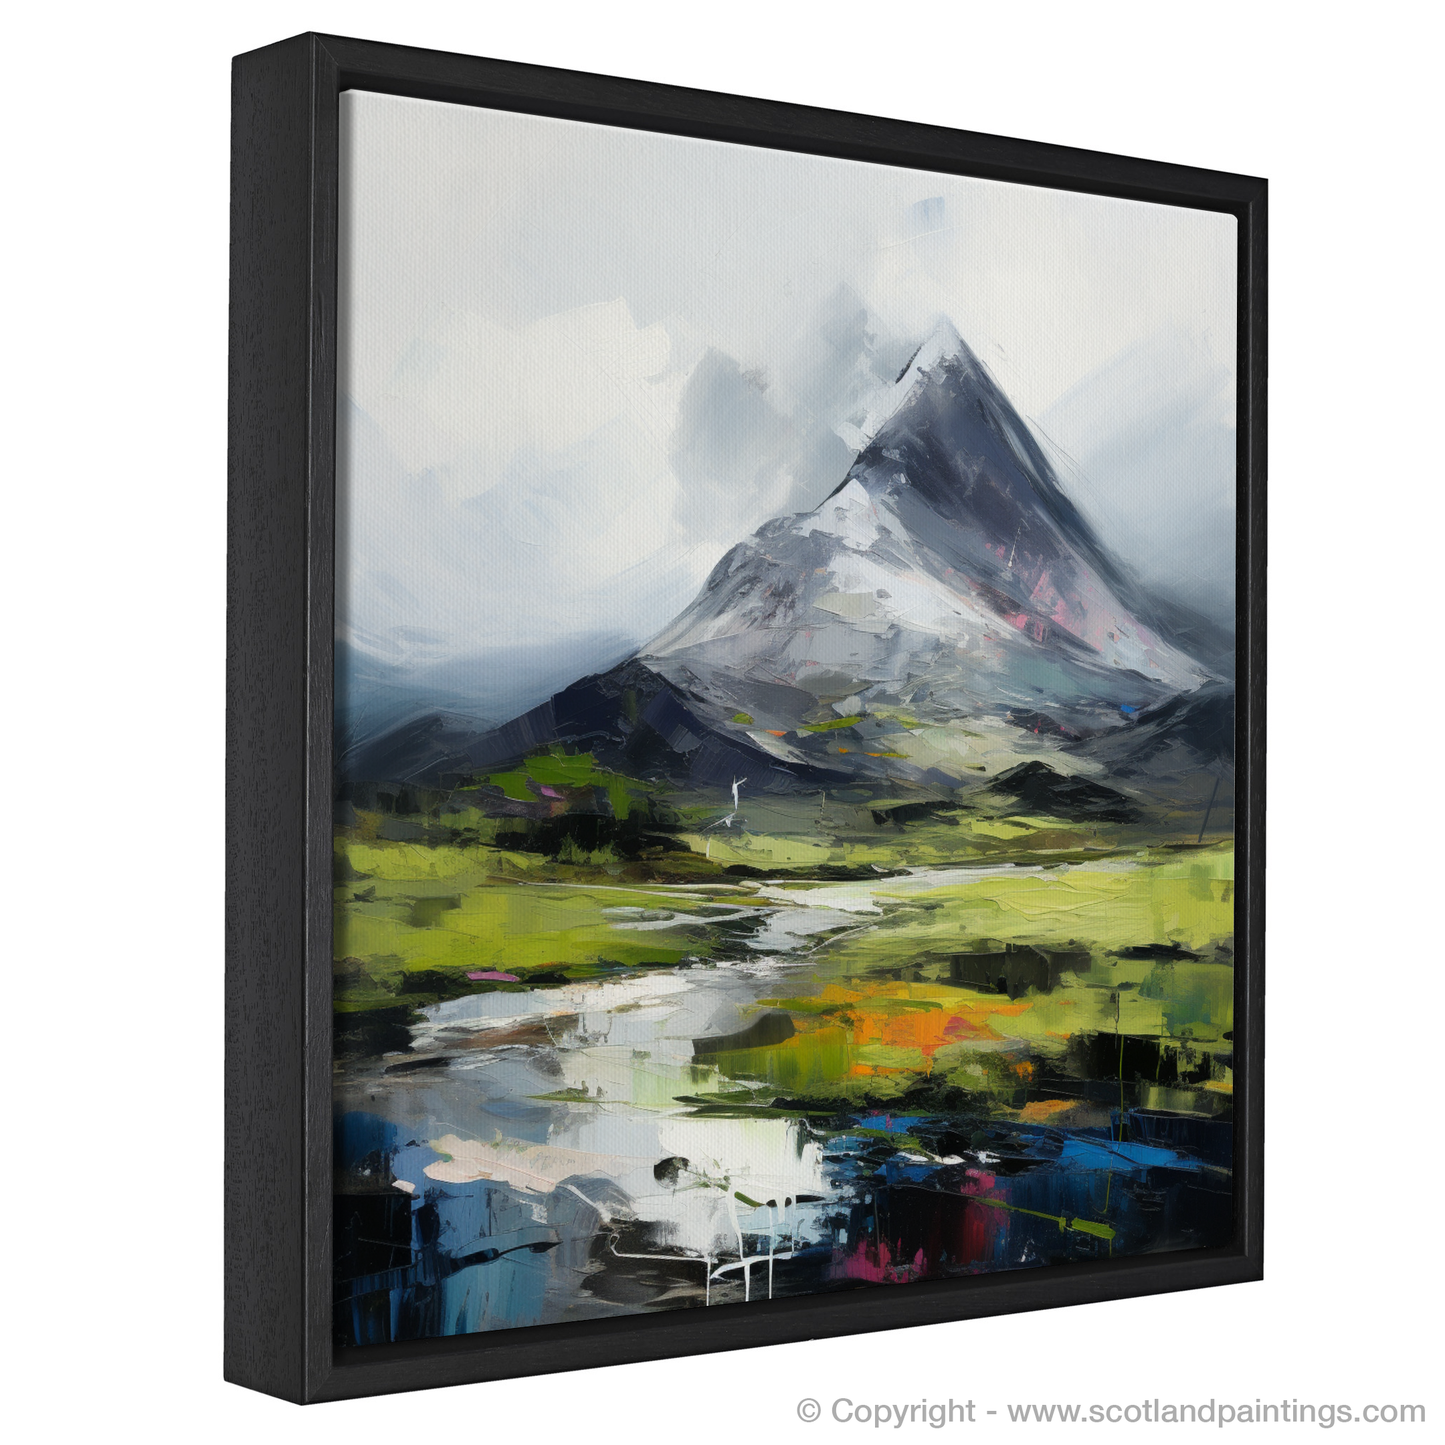 Painting and Art Print of Beinn Ghlas entitled "Emerald Reflections of Beinn Ghlas: An Expressionist Journey".